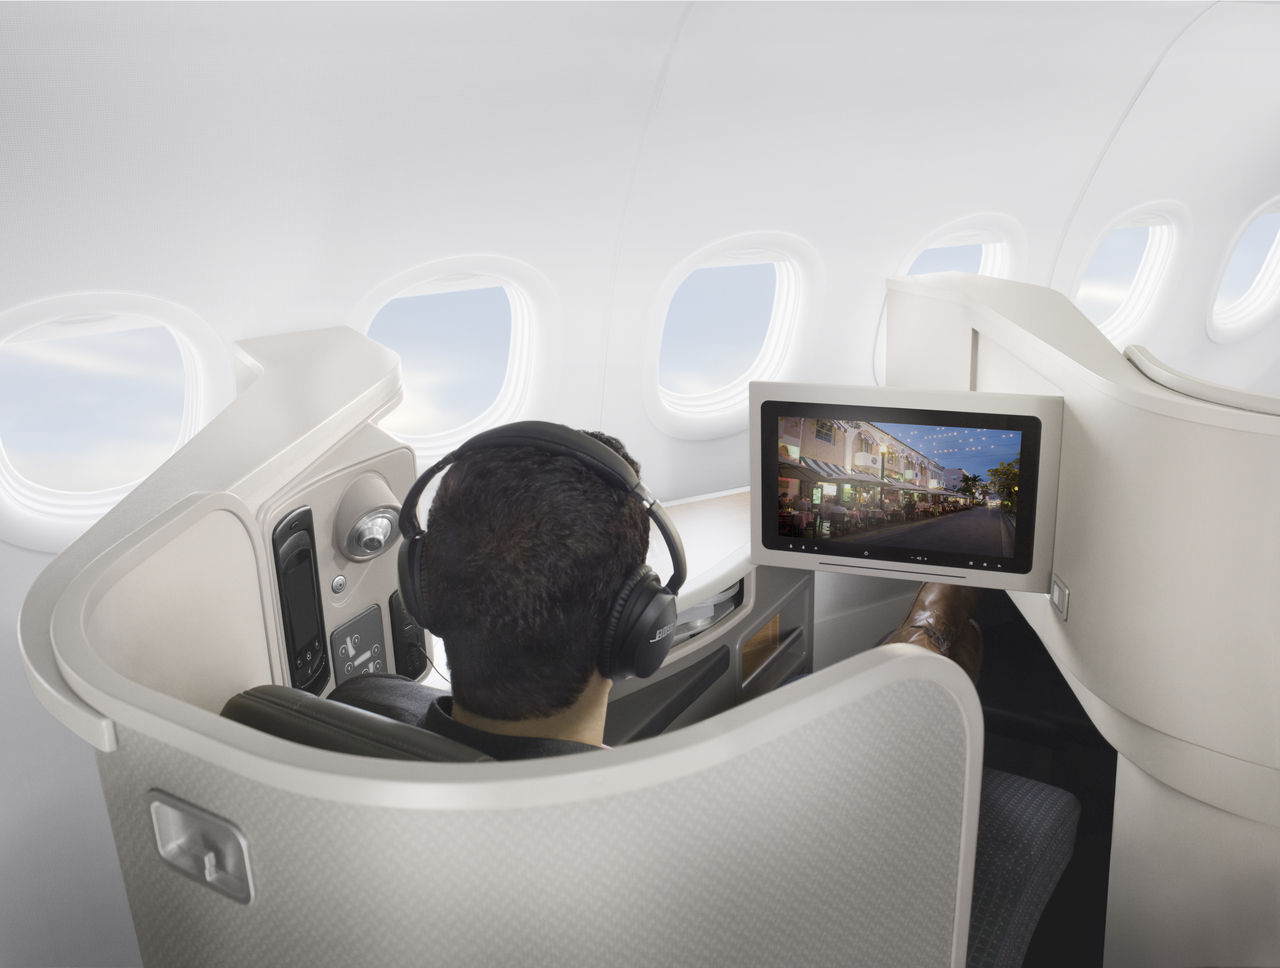 American Airlines Transcontinental Flagship Business Class In-Flight Entertainment